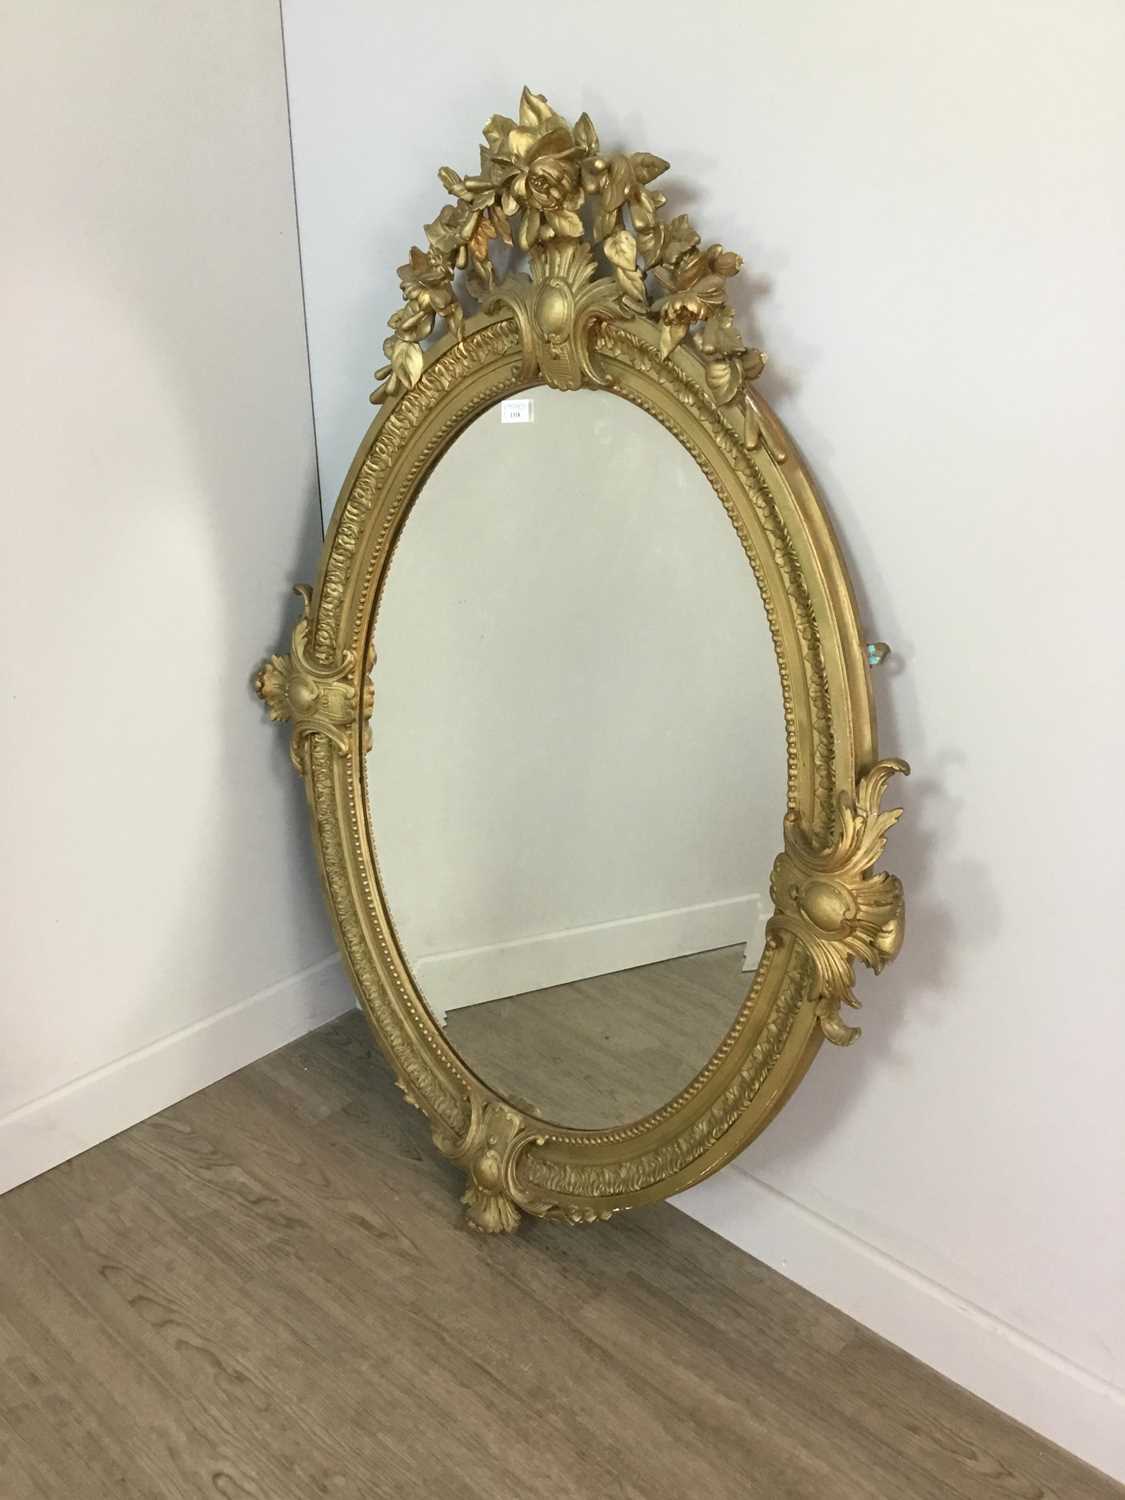 Lot 1318 - A LATE 19TH CENTURY GILT WOOD WALL MIRROR